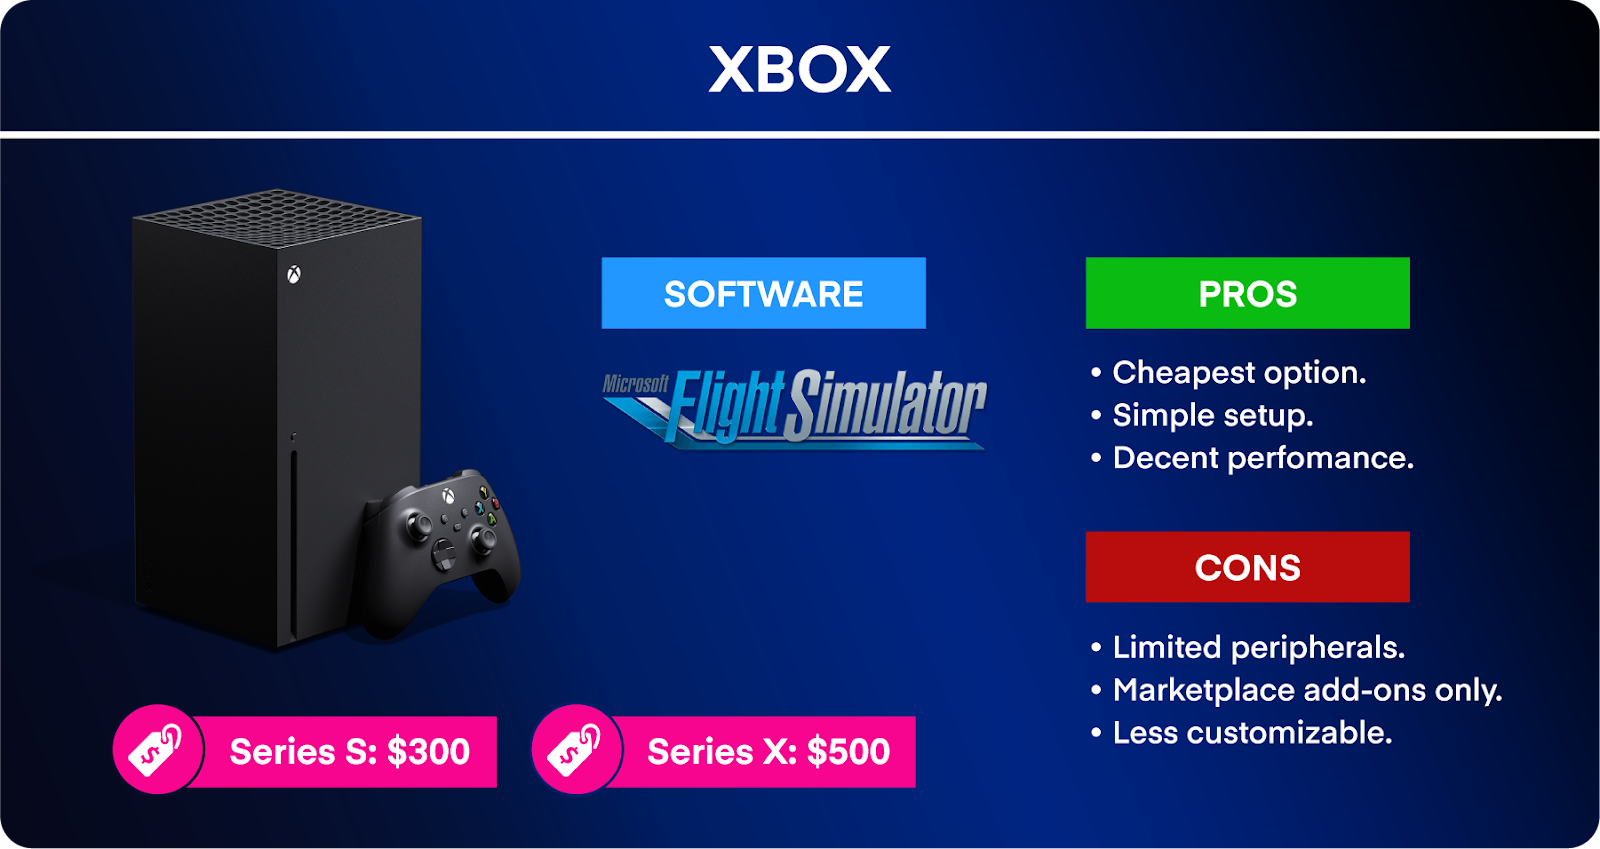 Xbox infographic, listing sim software, price range, pros, and cons.